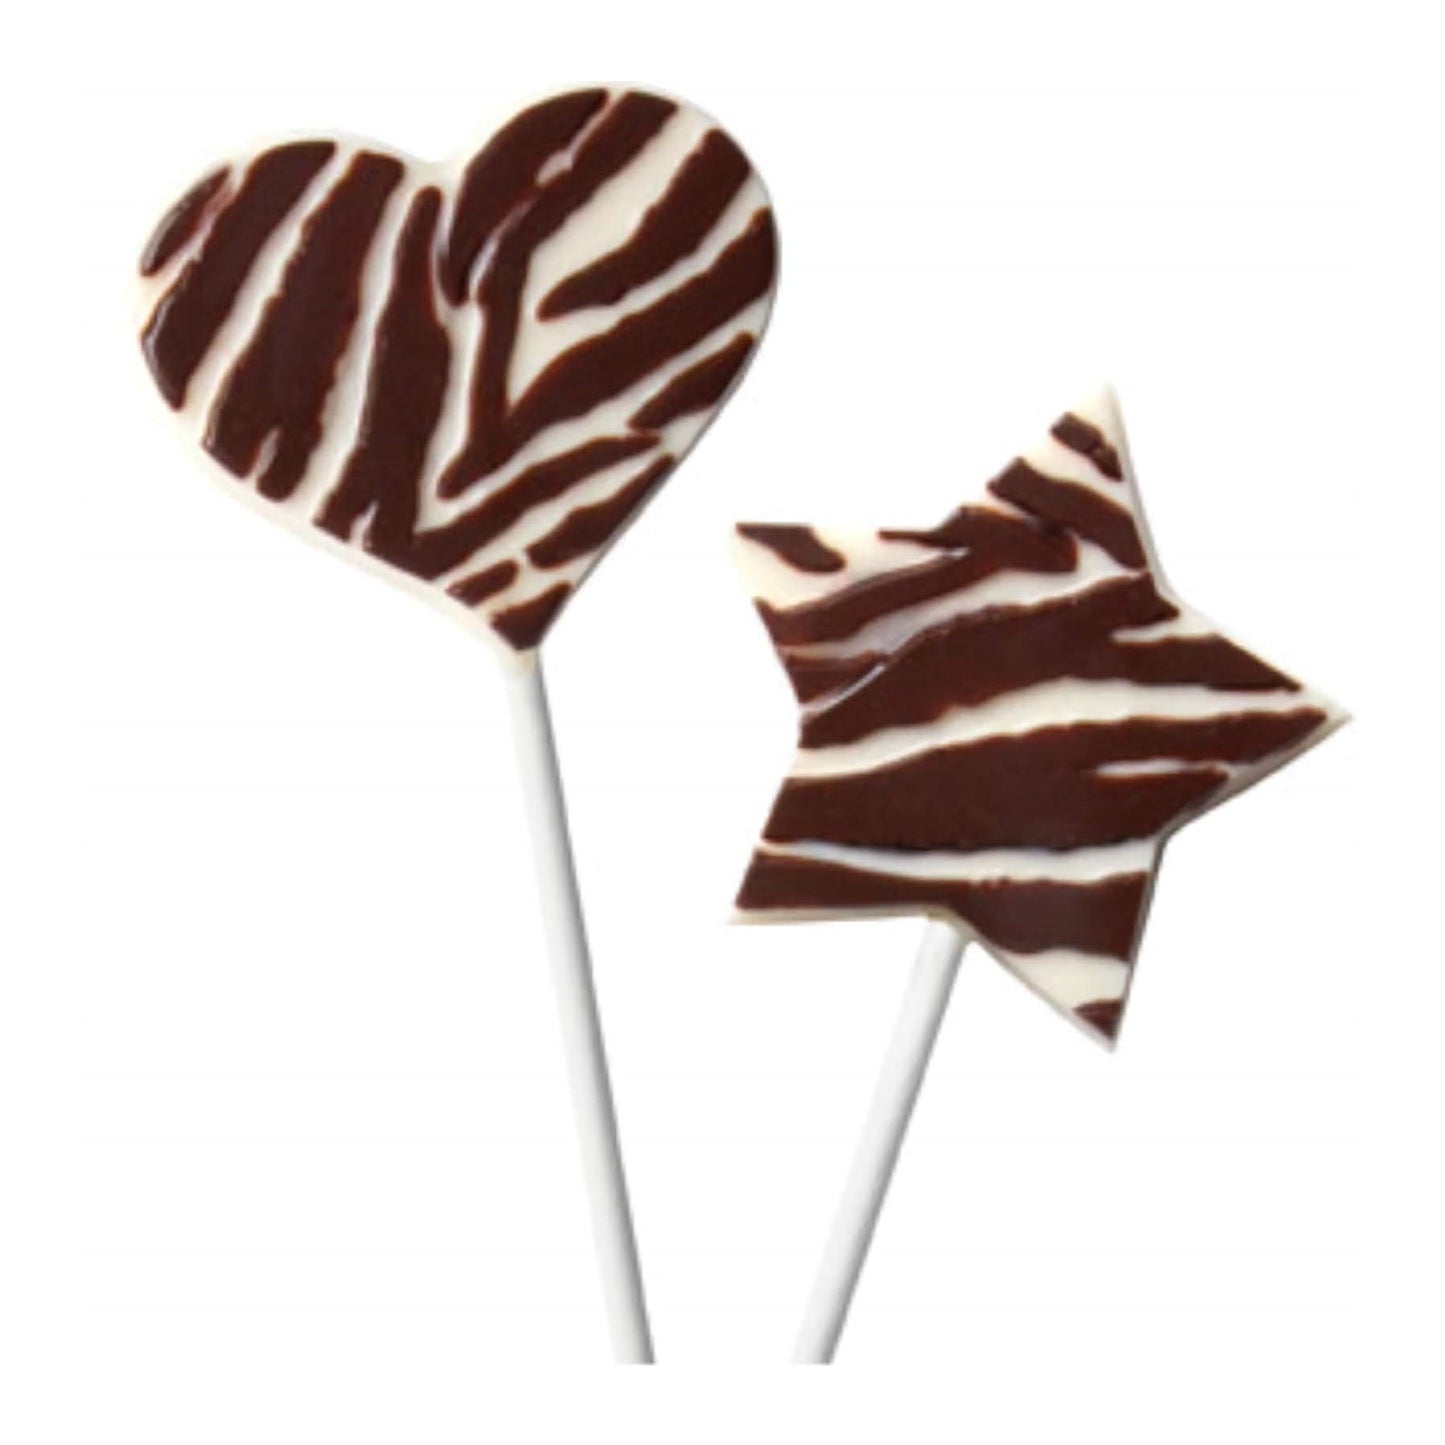 A duo of chocolate lollipop molds, one shaped as a heart and the other as a star, both adorned with a zebra stripe pattern for a wild touch, offering a unique blend of romance and adventure for themed parties or creative baking projects.